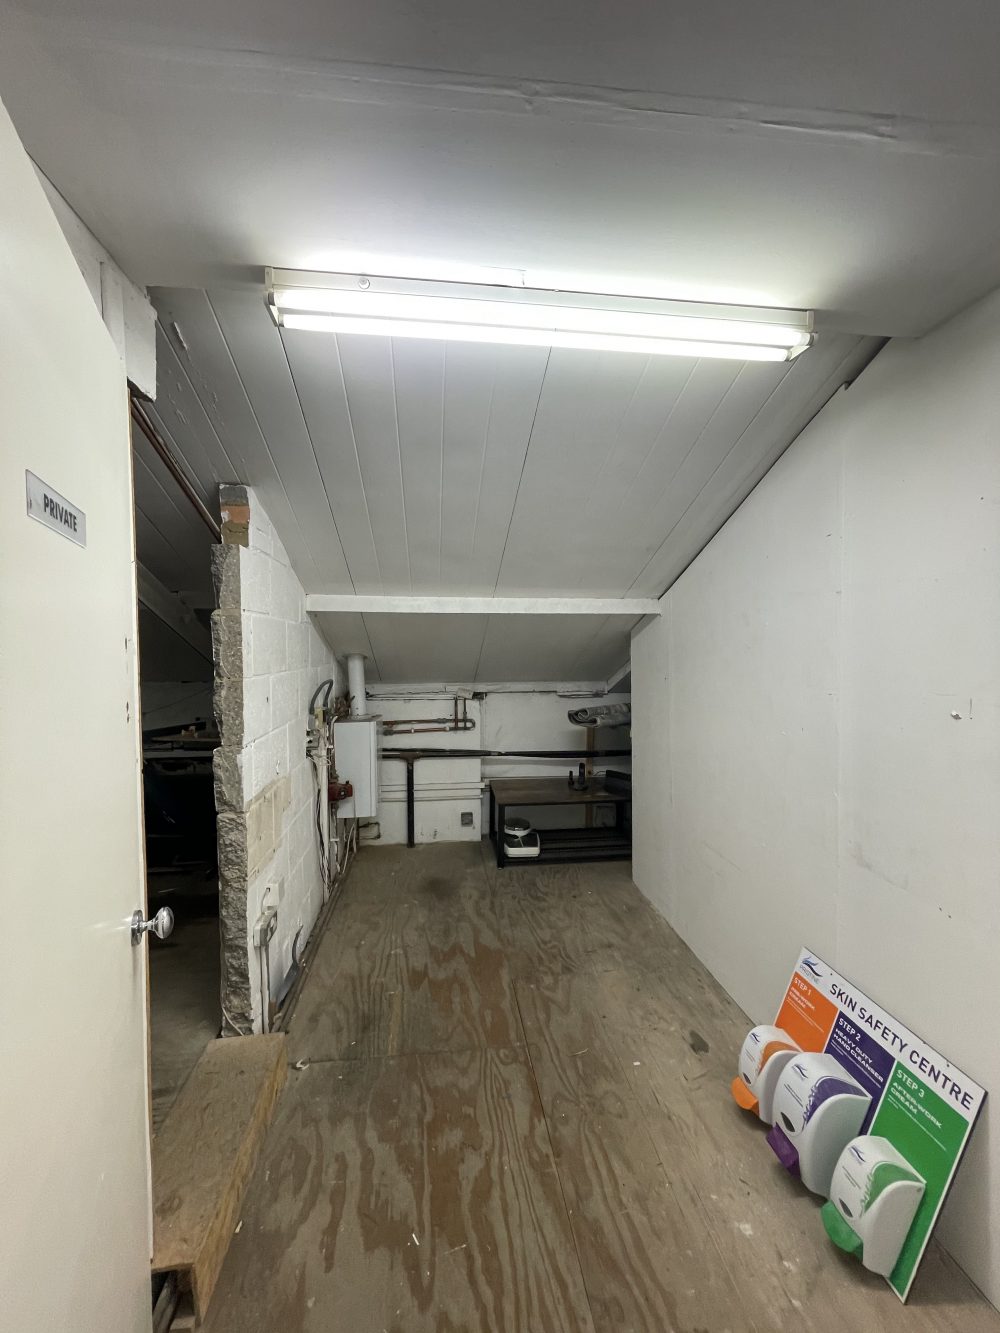 N15 Seven Sisters (High Cross, Fountayne Road) – Live work style Warehouse Unit to rent for artists 25